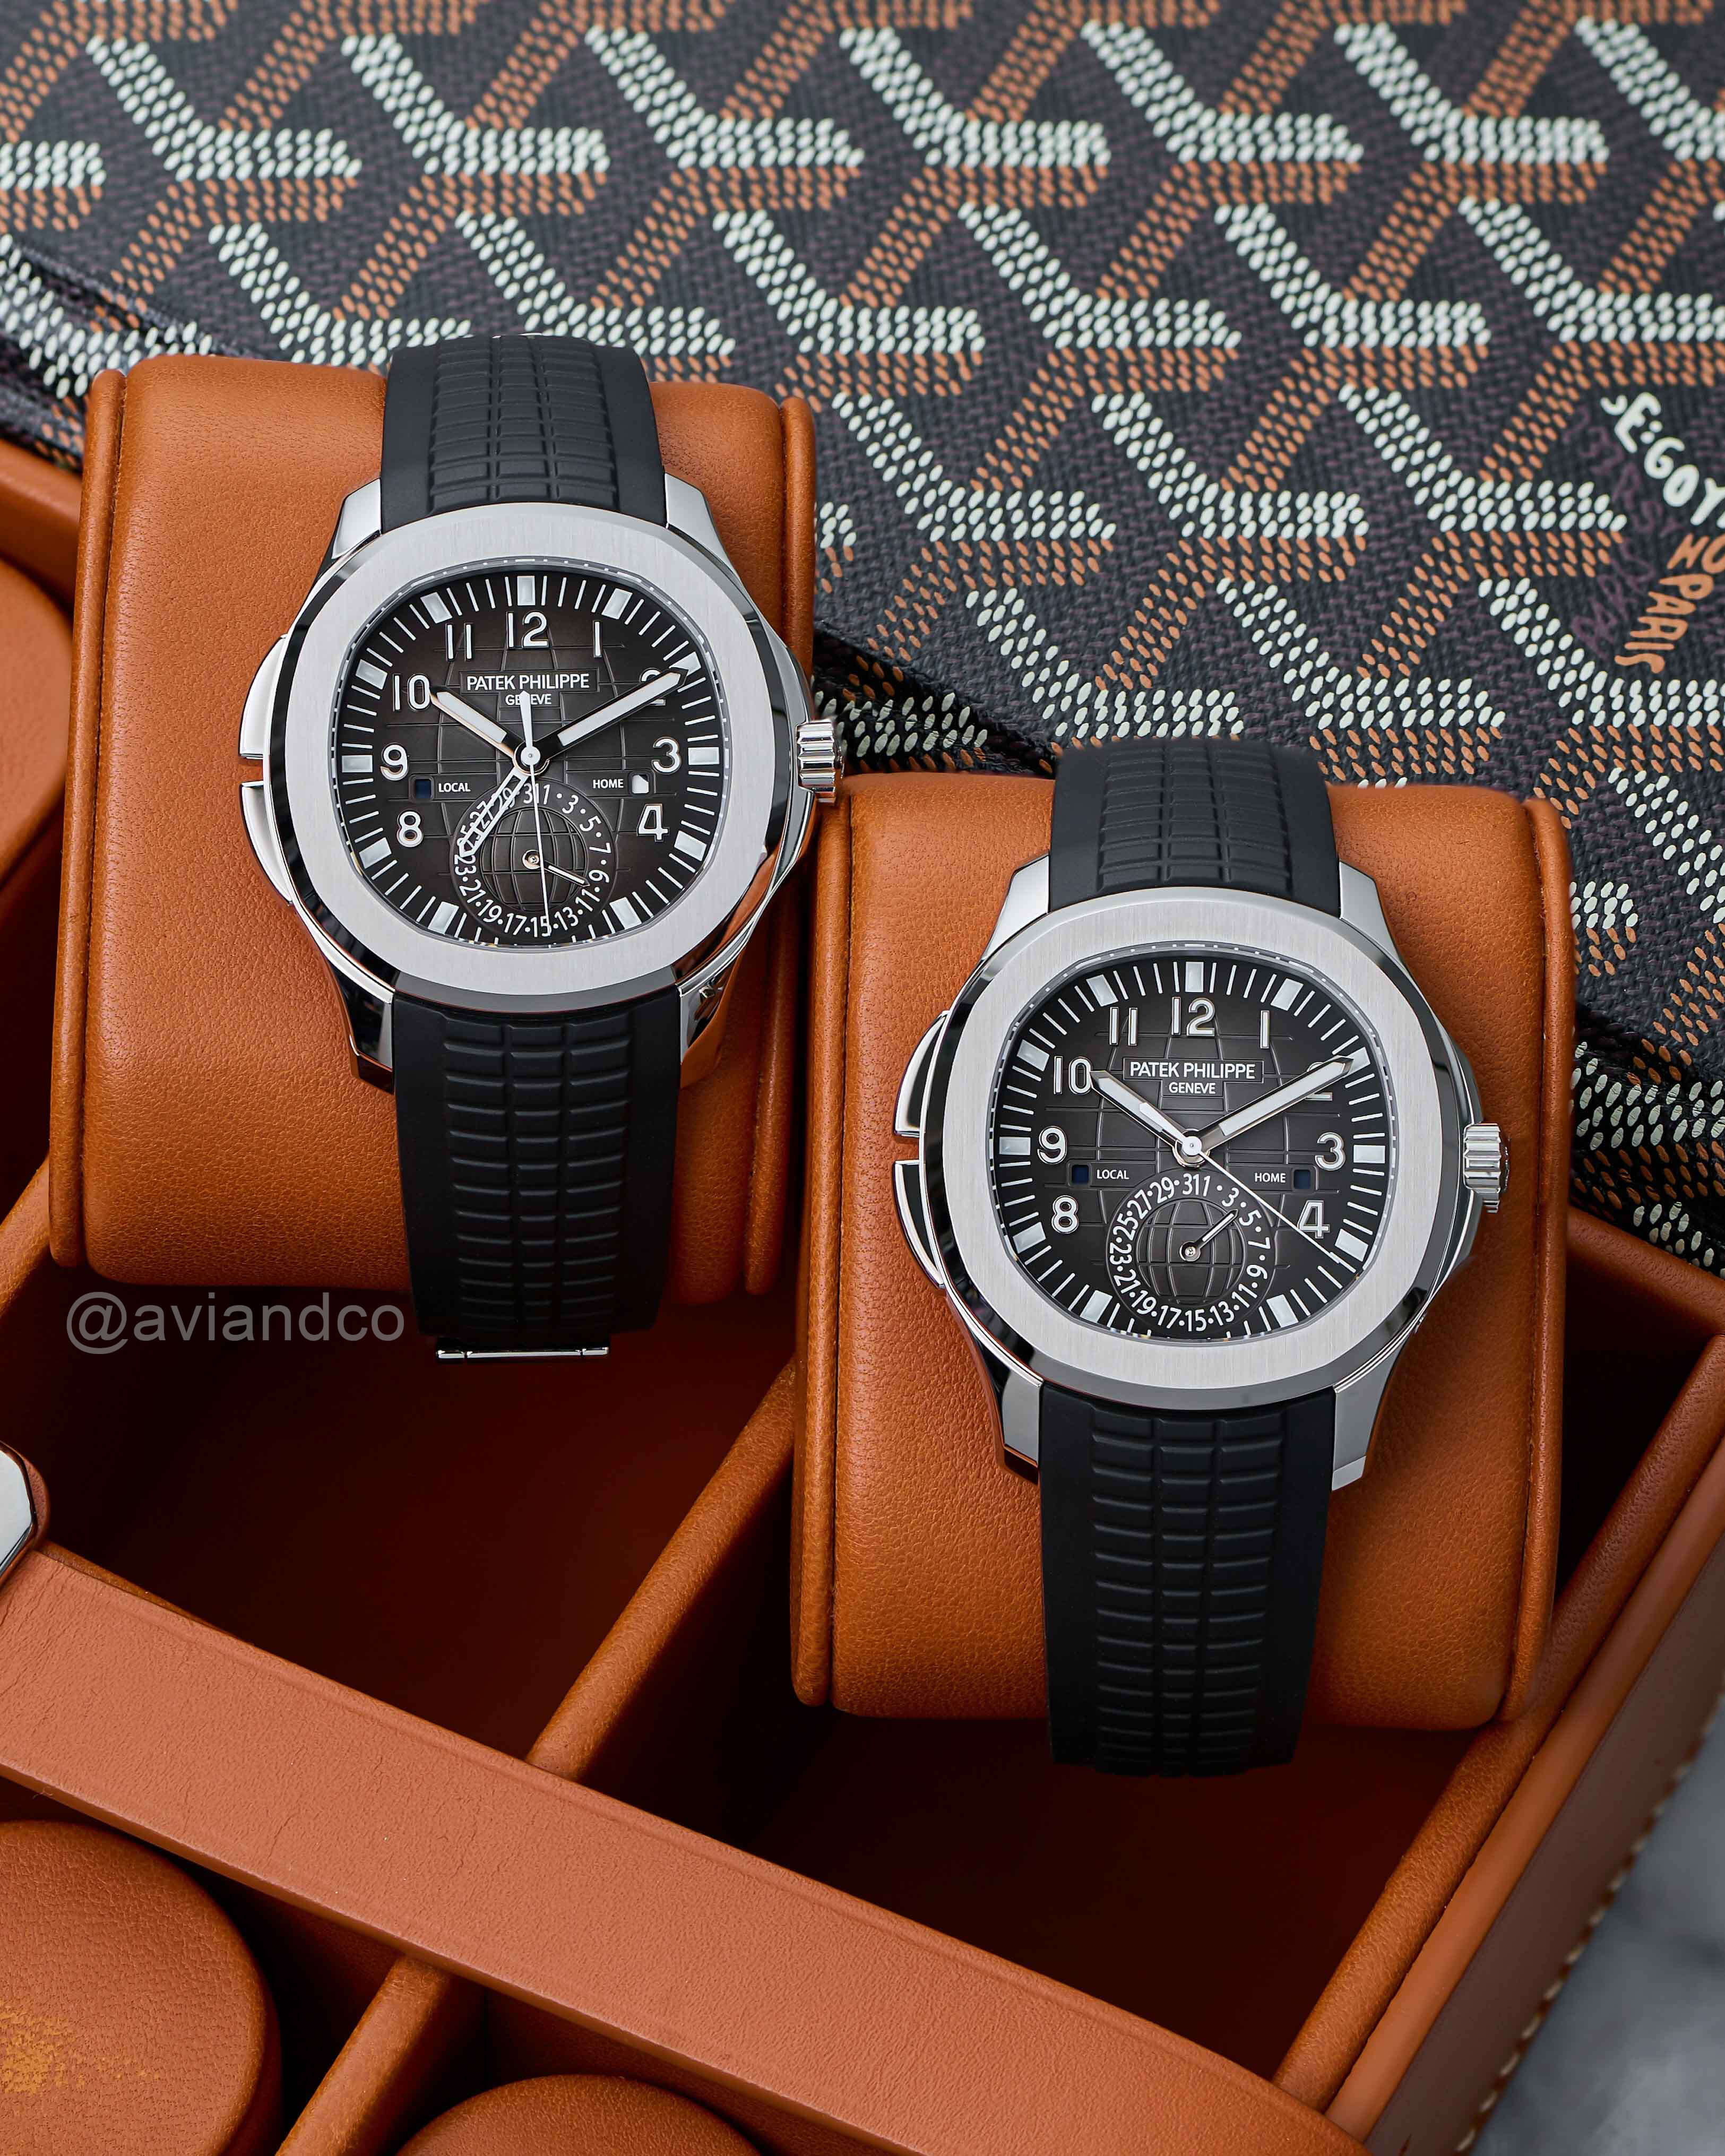 Two Identical Stainless Steel Timepieces with Dual Time Zones, Black Dials, and Black Rubber Bracelets Displayed on Brown Watch Cushions.